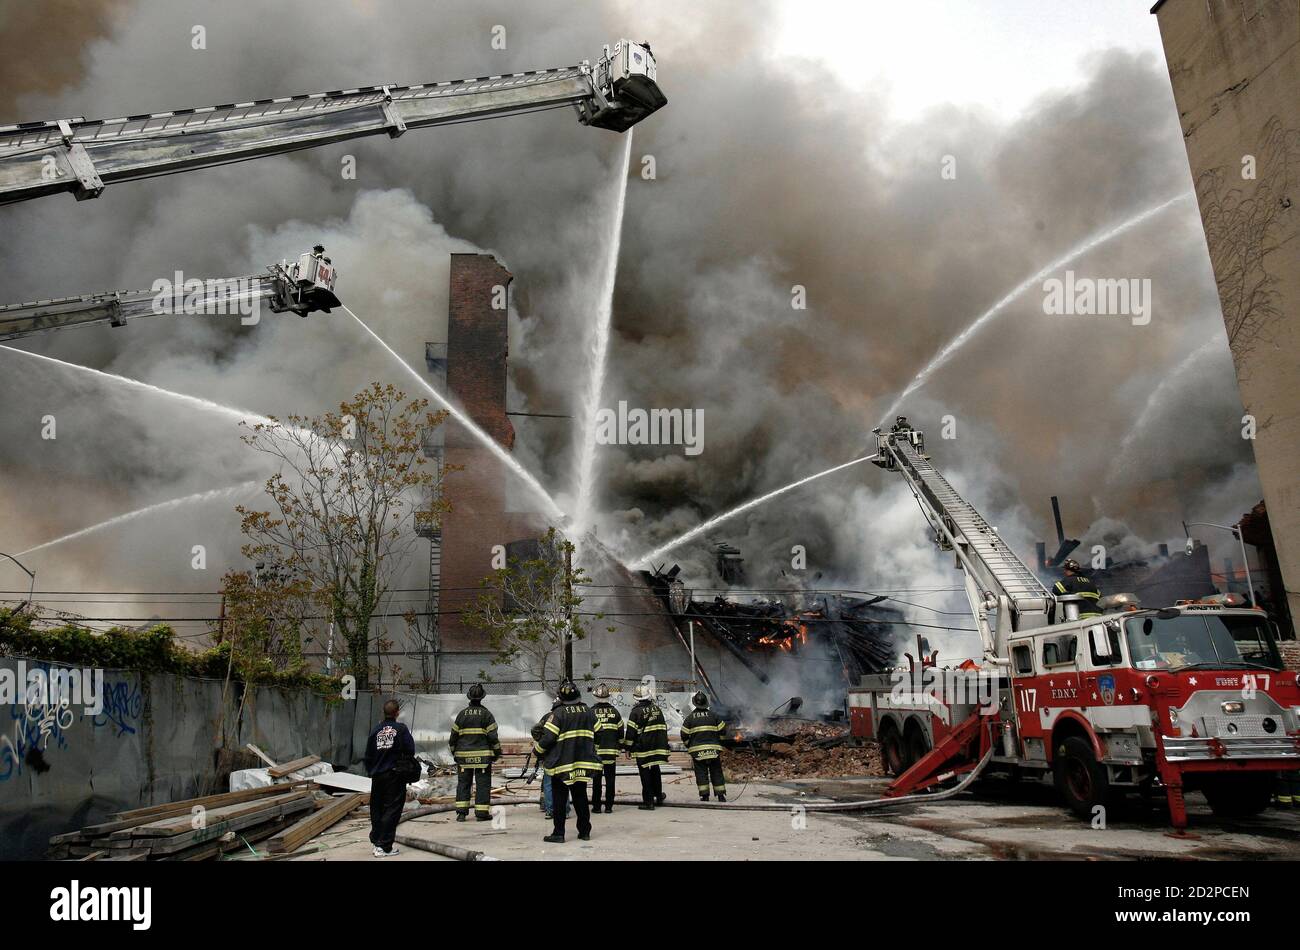 New York City firefighters battle a waterfront warehouse fire in Brooklyn, New York, May 2, 2006. The blaze, which had reached nine-alarm status and engulfed several buildings and wharfs along the East River, could be seen for miles. [Fire Commissioner Nicholas Scoppetta called it the largest fire in the city in more than a decade, excluding the World Trade Center attack.] Stock Photo